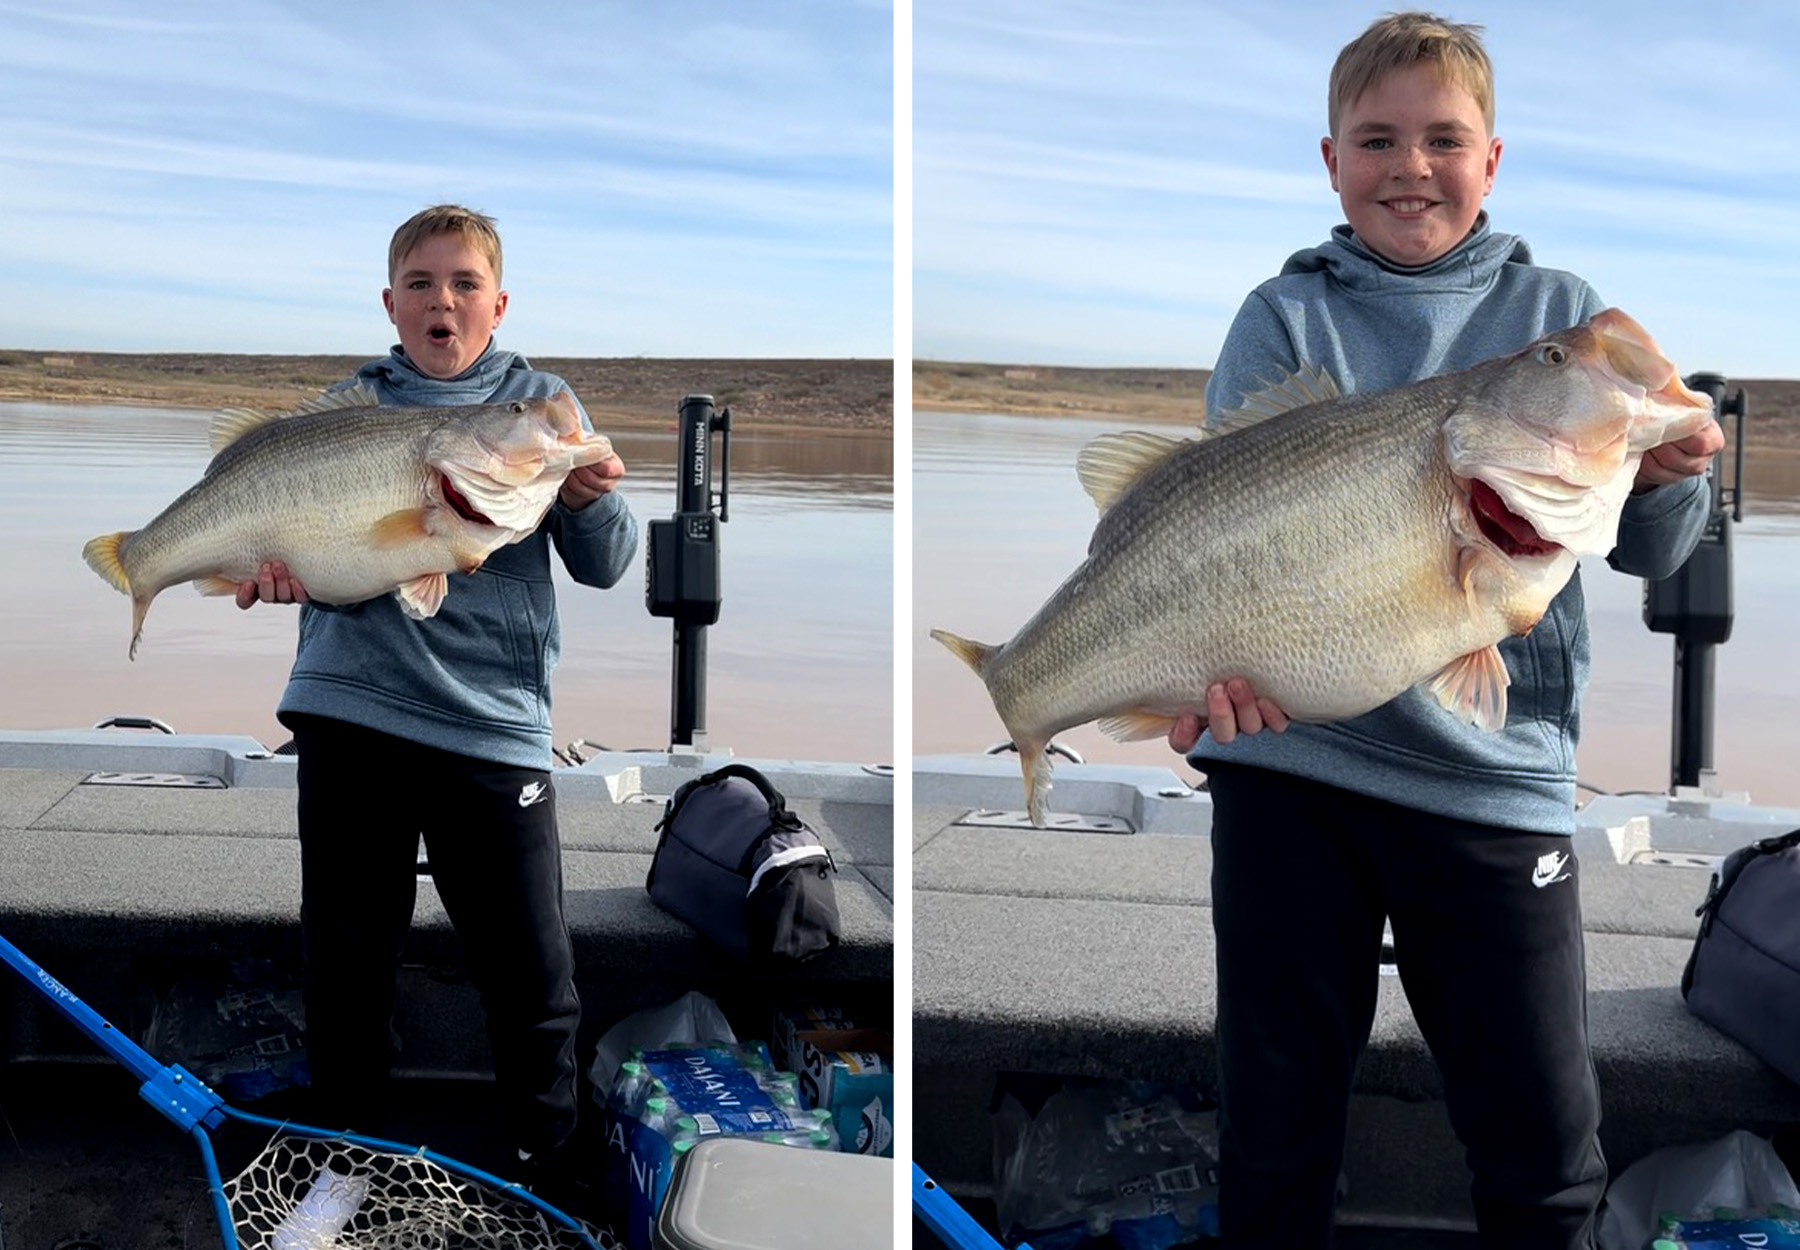 Did You Know? Texas Had Record Fishing Year in 2019 - Game & Fish